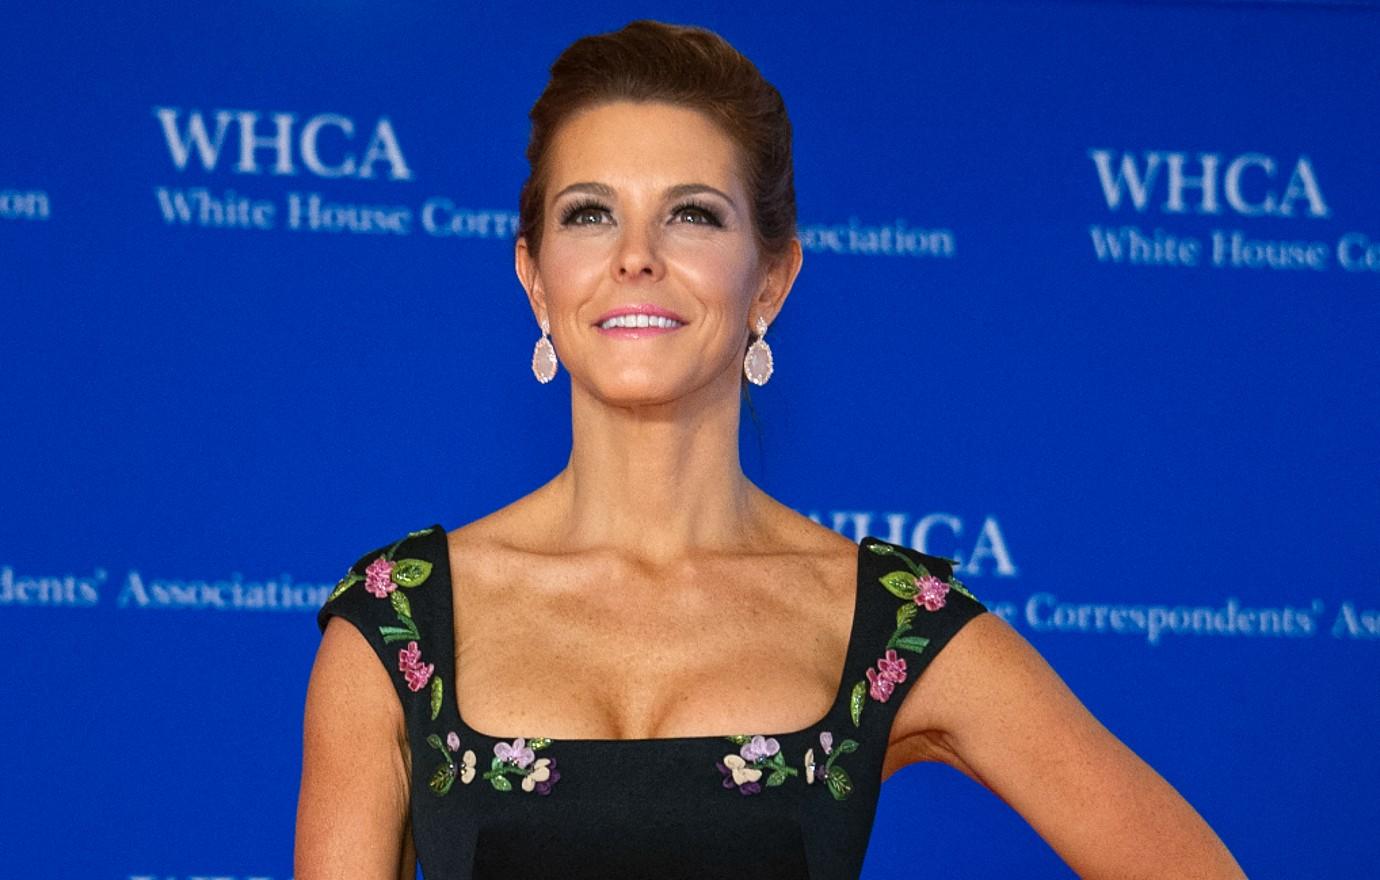 MSNBC's Stephanie Ruhle Received 'Non-public Financial Details' From ...